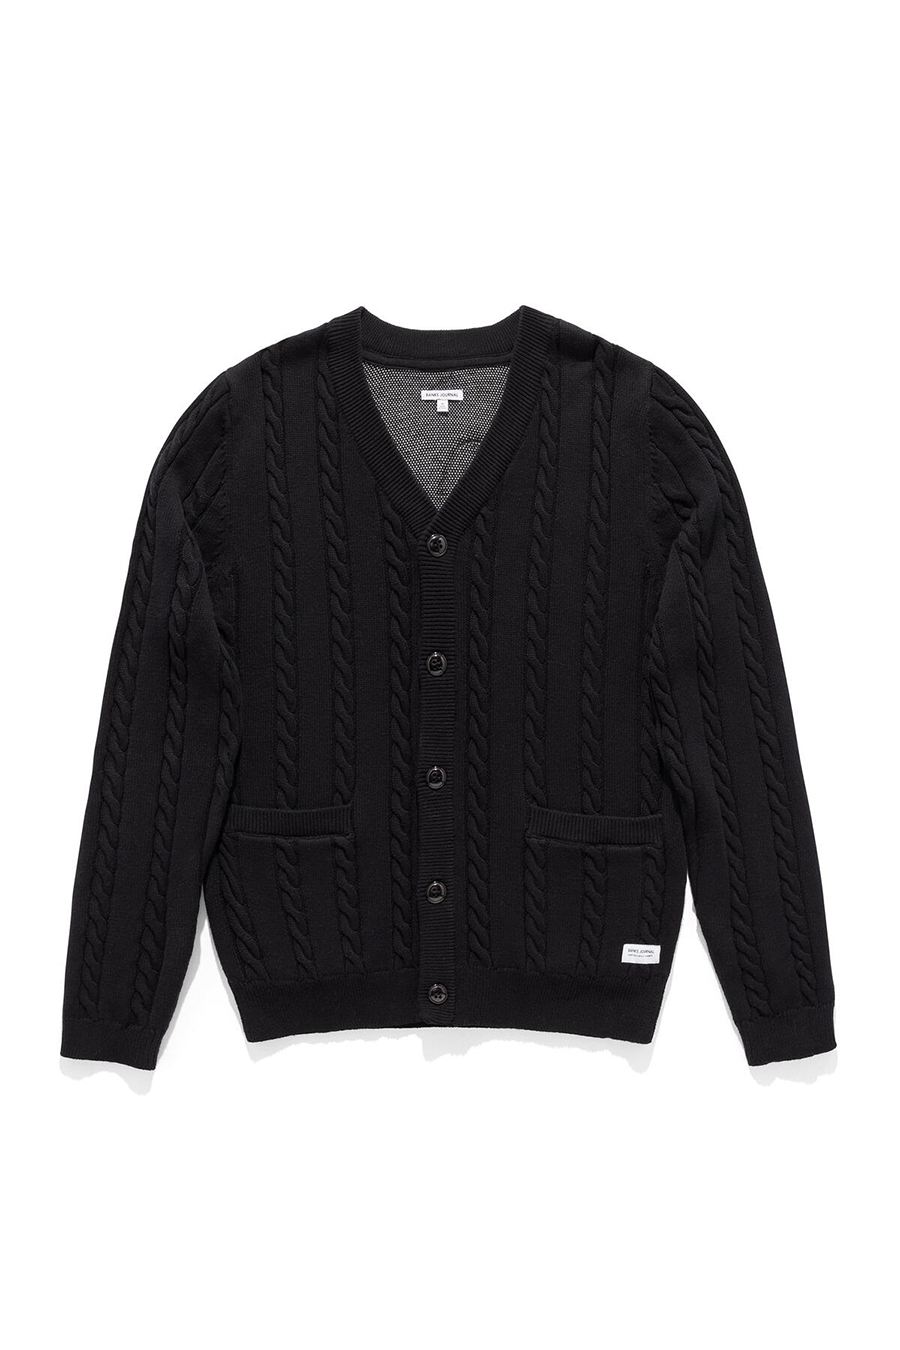 Off The Grid Knit Cardigan | Black - Main Image Number 3 of 4